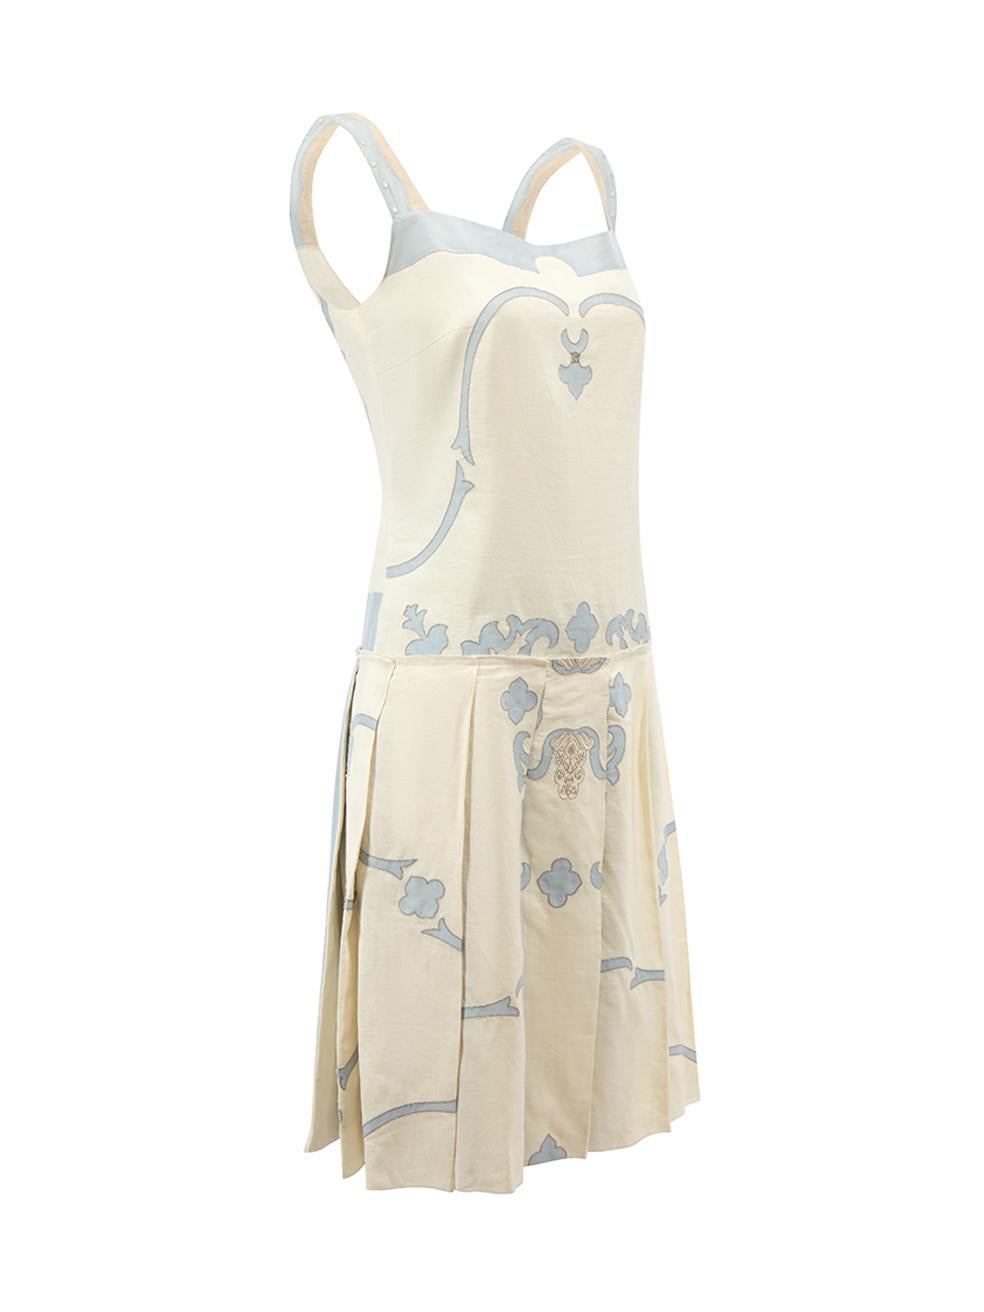 CONDITION is Very good. Hardly any visible wear to dress is evident. Minor loose threads along hem is seen on this used Prada designer resale item.   Details  Cream Linen Mini dress Blue appliqué design Pleated skirt Frill finishing Side zip closure